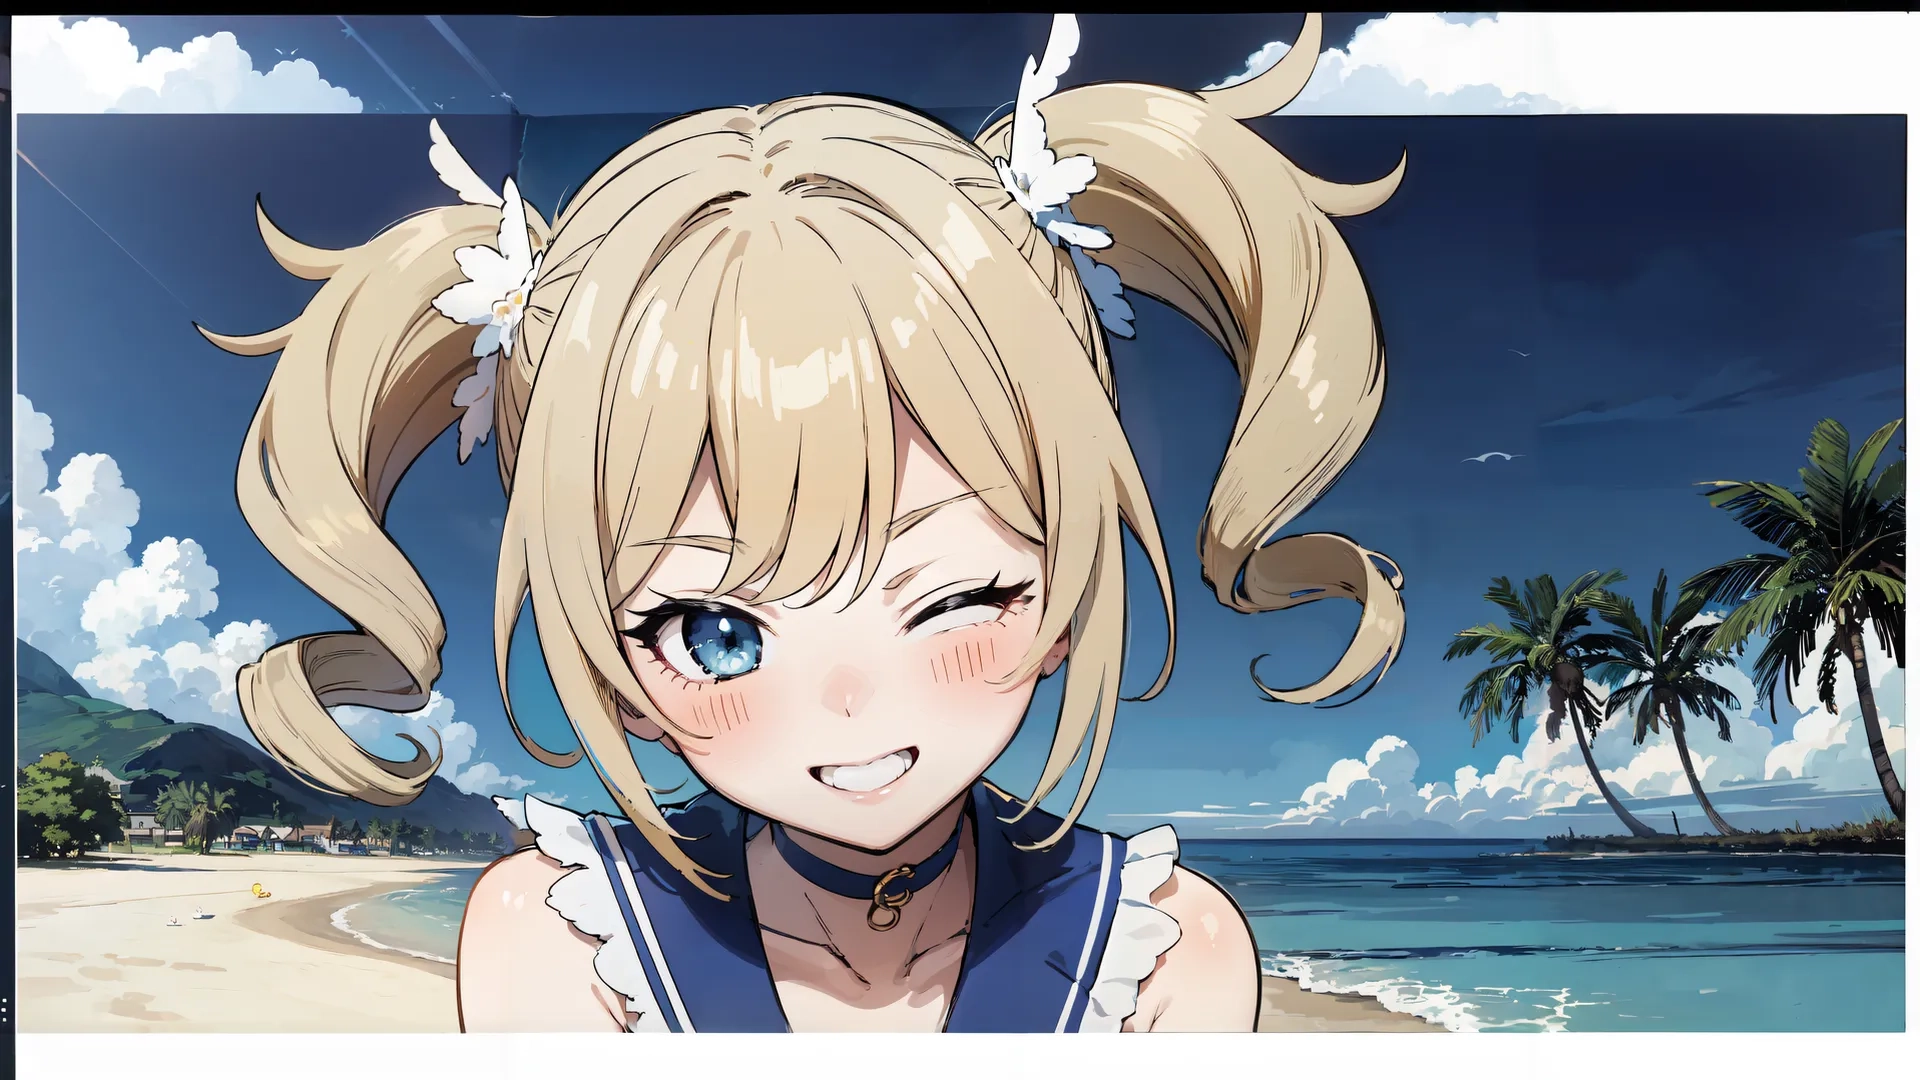 the girl has blonde hair at the beach she is in midair, with blue eyes, and bunnies and blue is a blue hair that is pig tail
